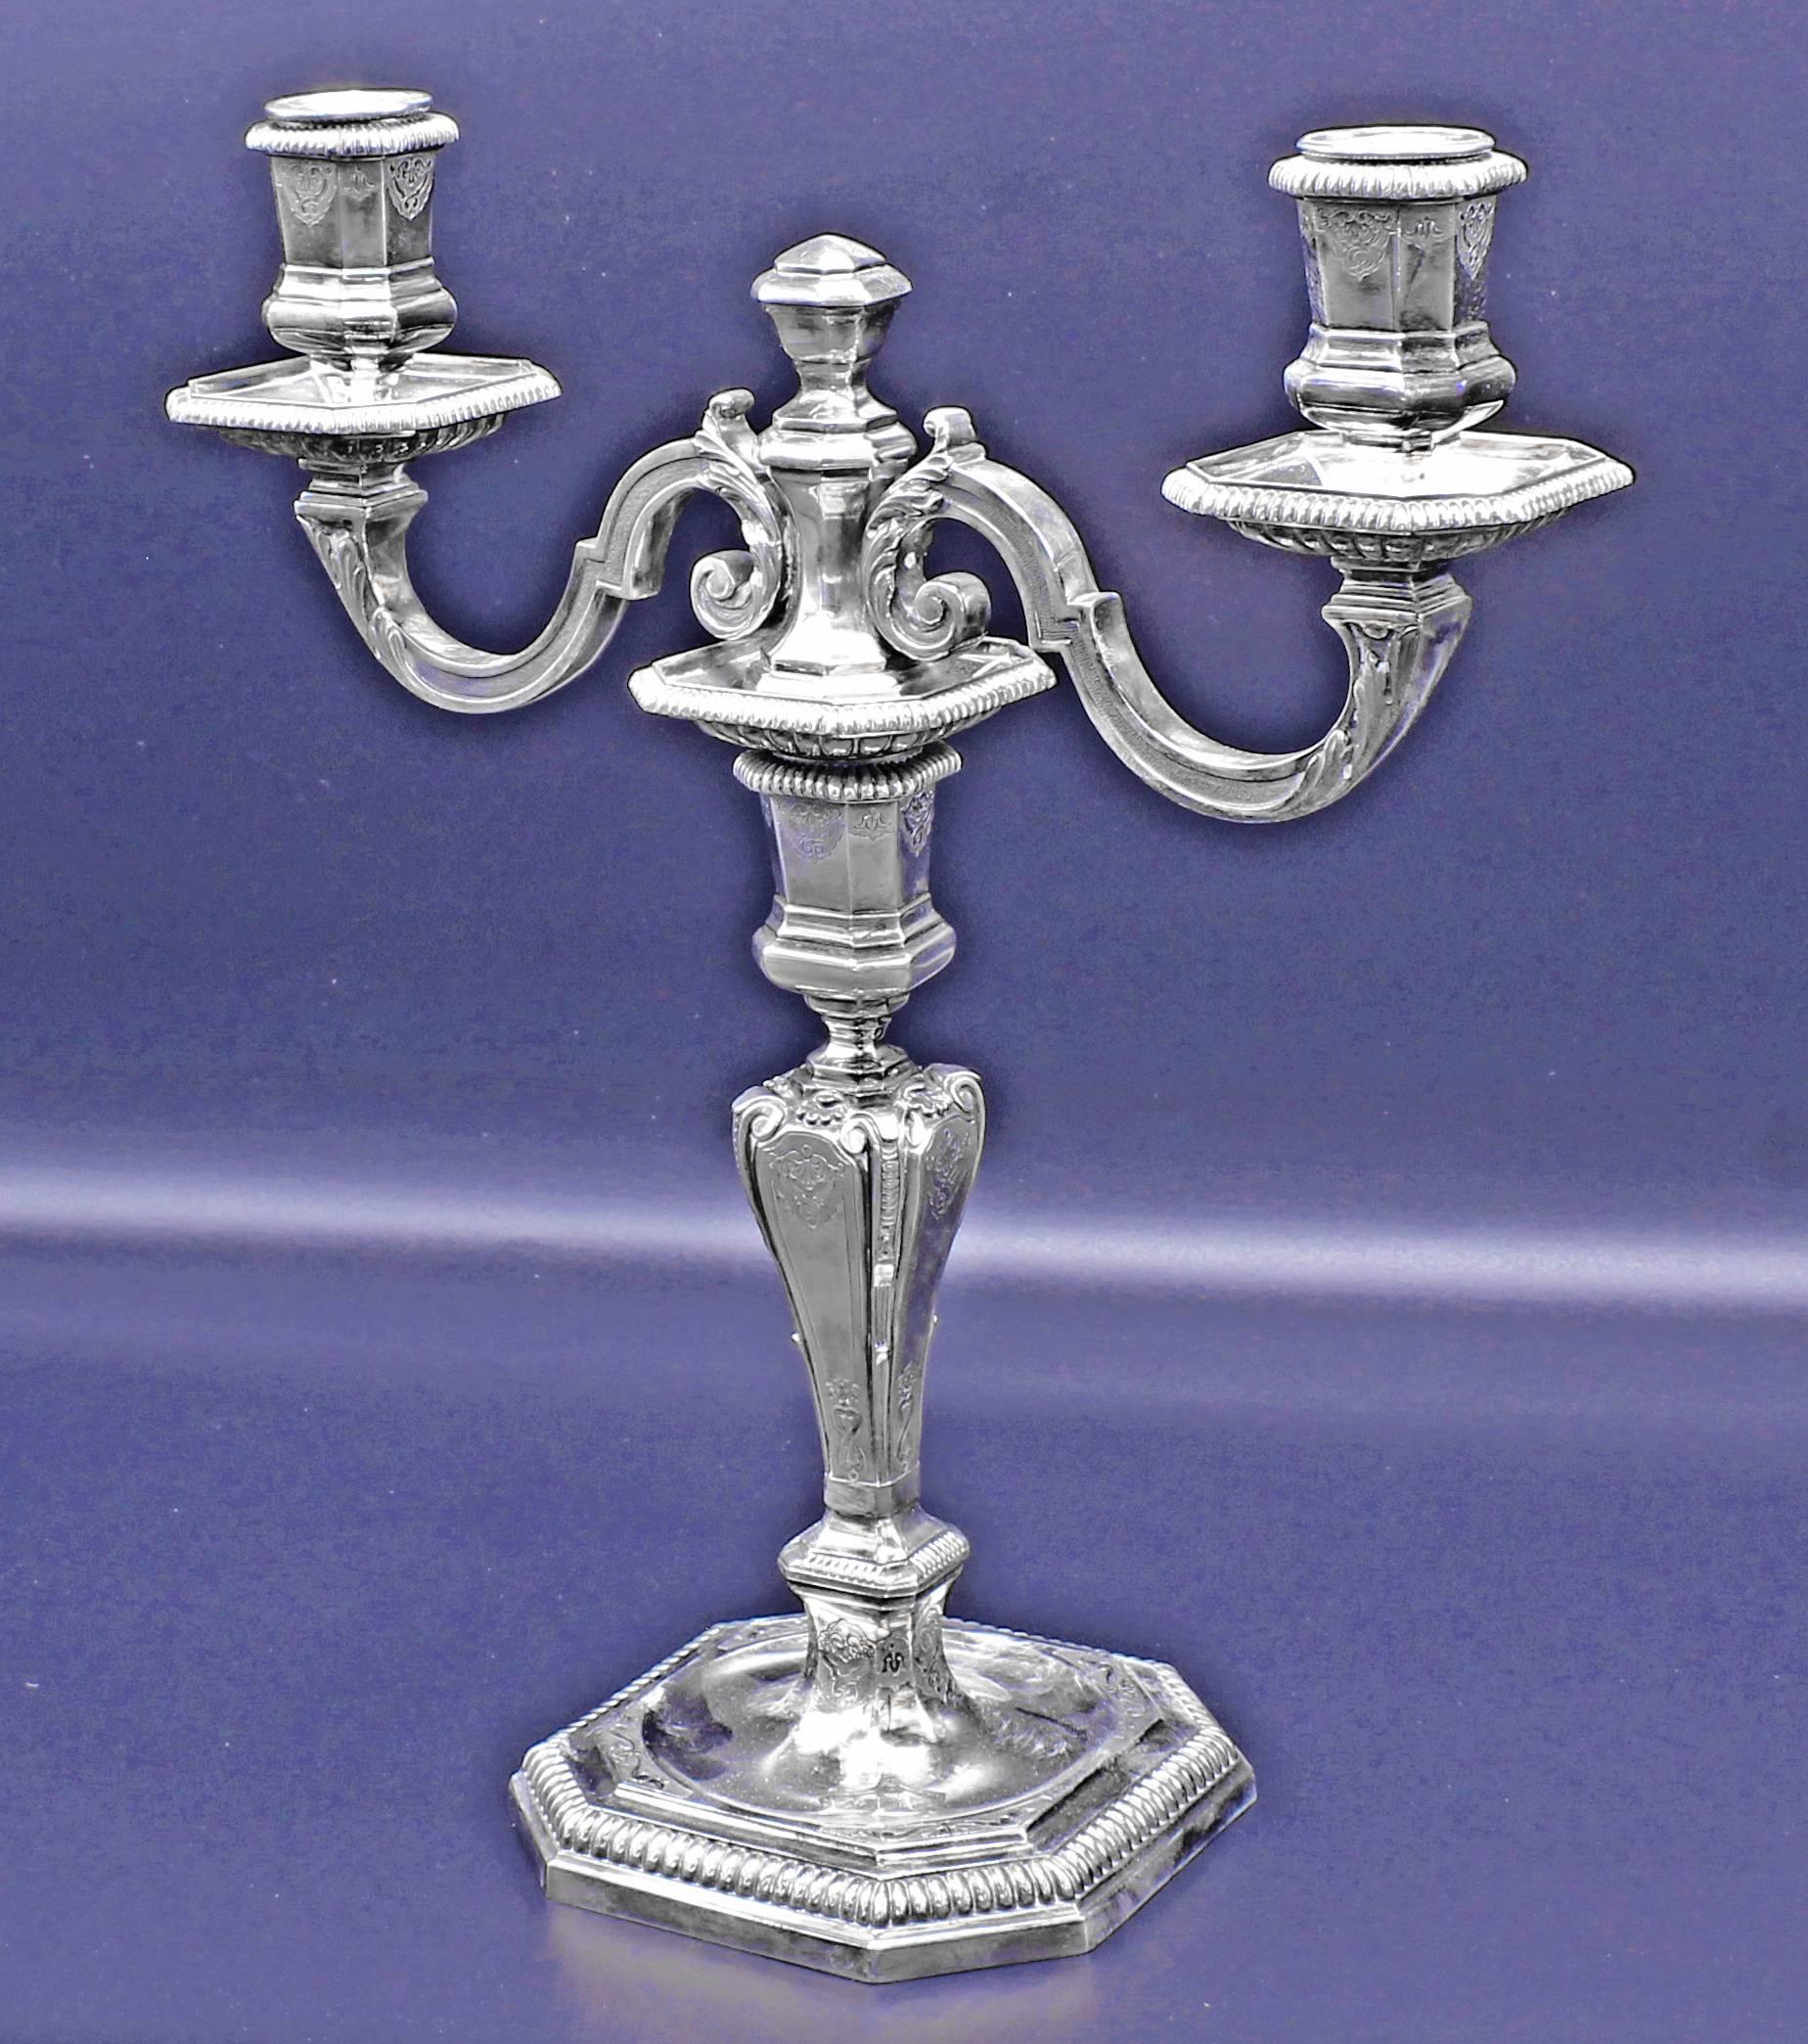 From the  master silversmiths  of the house Lapparra a pair of magnificent  convertible  candelabras.  Meticulously crafted from 950 silver  with intricate hand engraving. 4 ¾ square base  12 inches high. Solid 950 silver 91.35 ounces